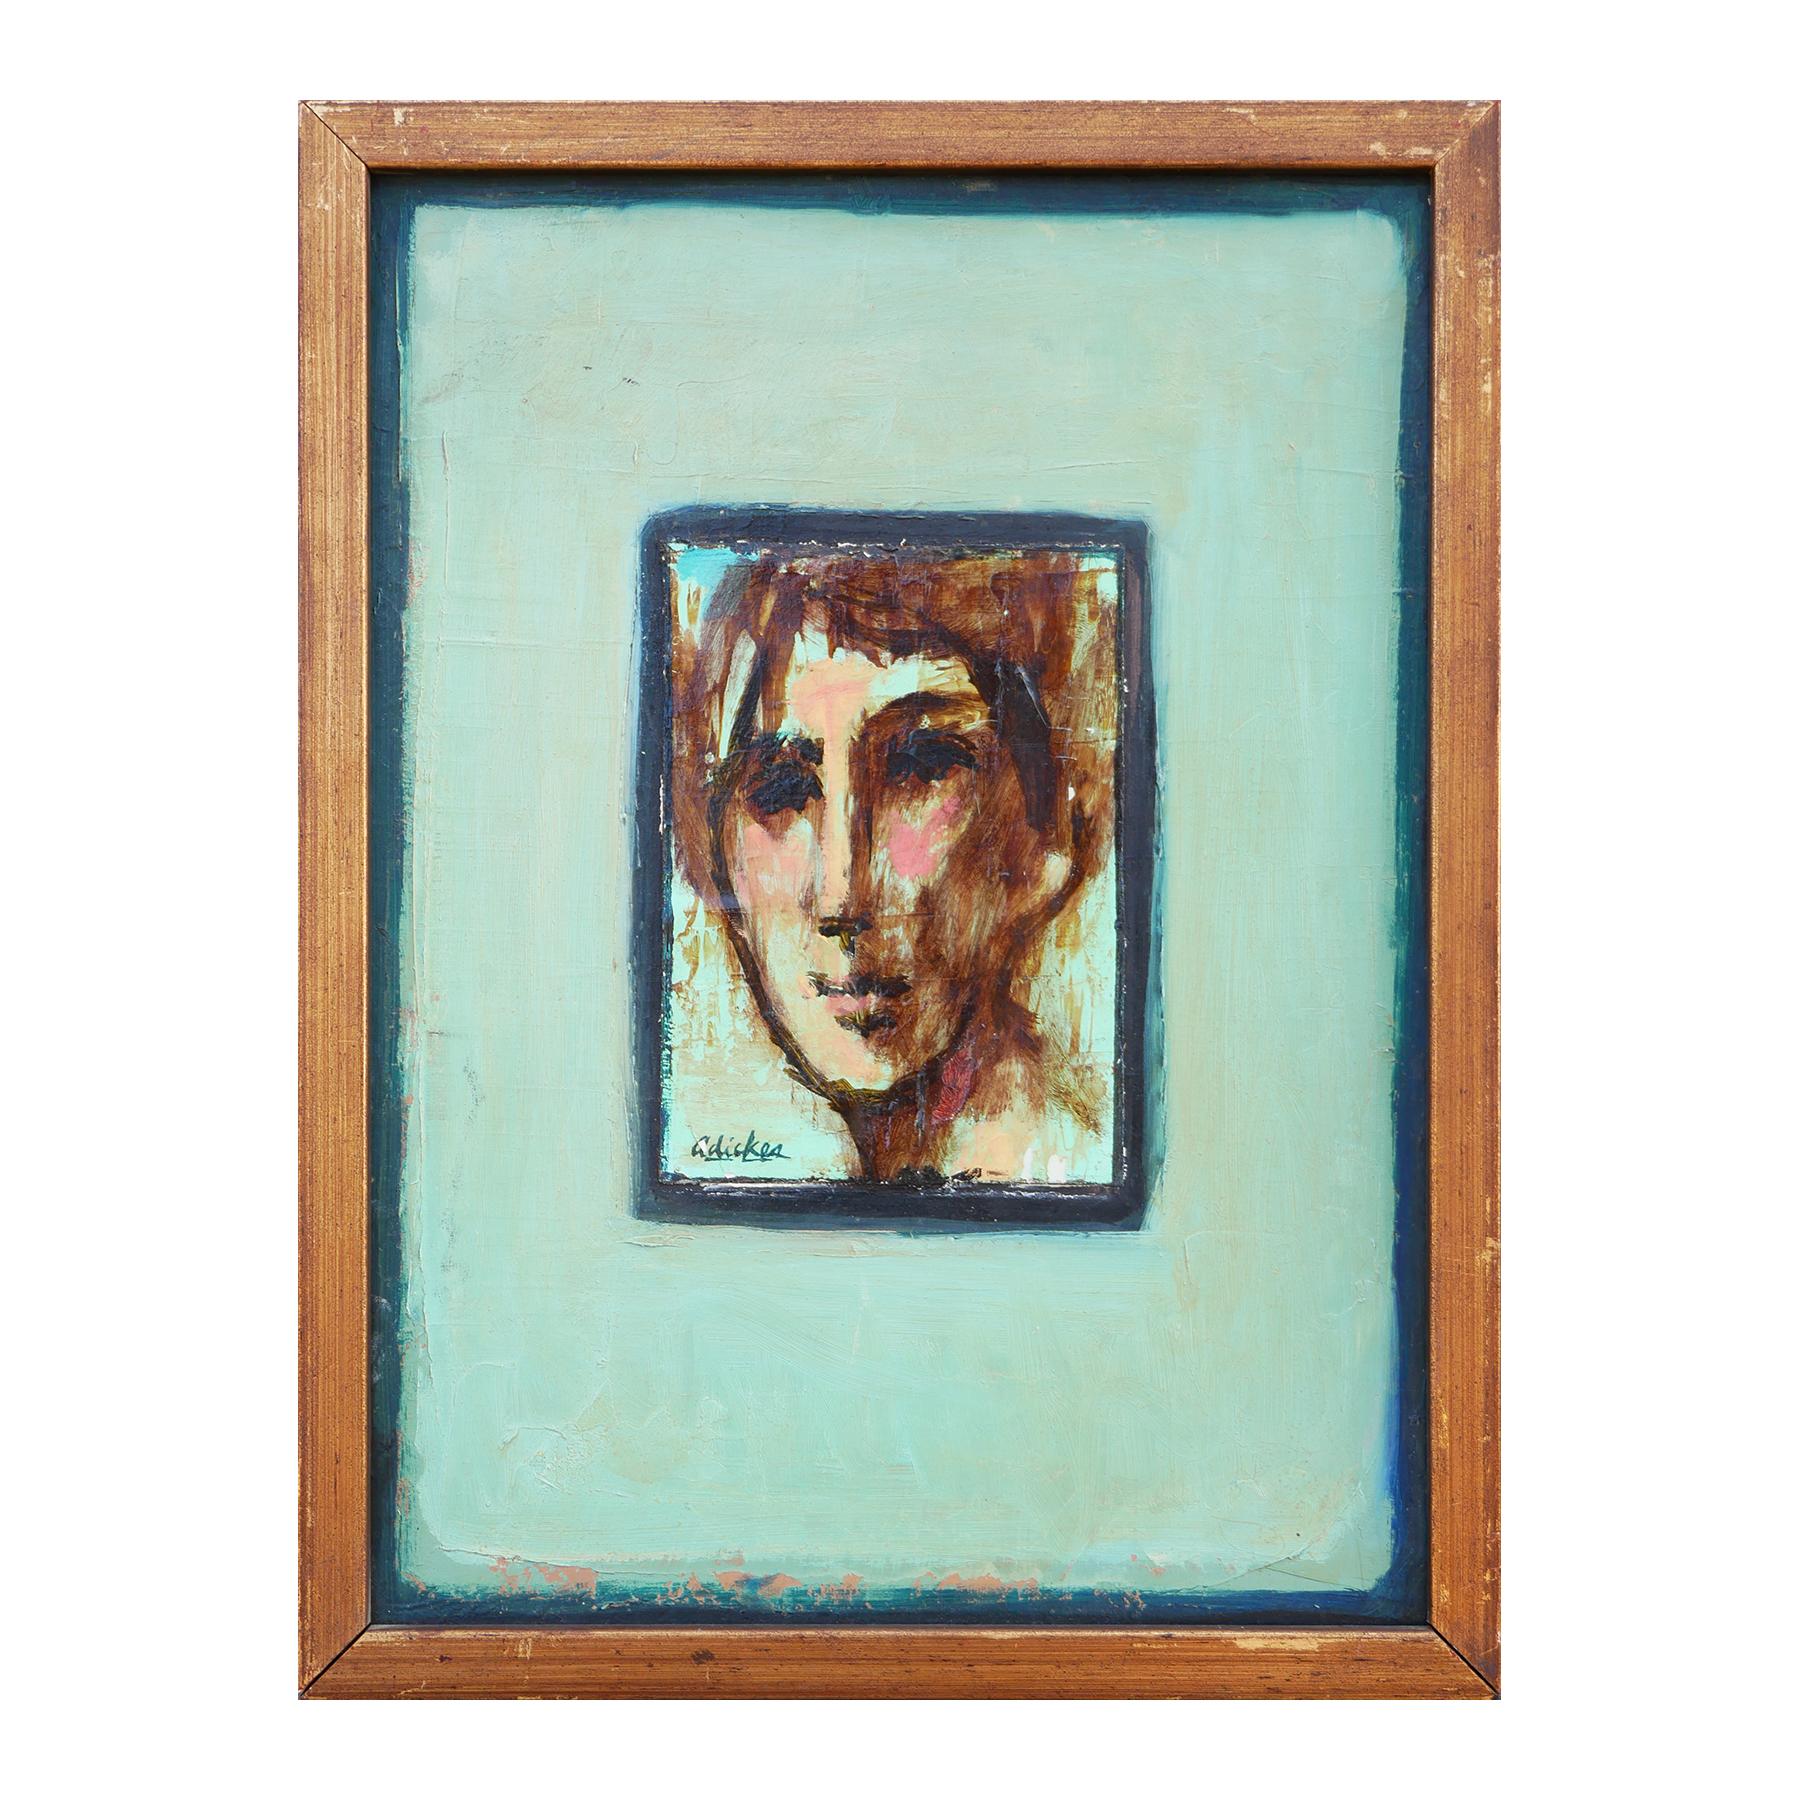 Modern abstract figurative portrait painting by Houston, TX artist David Adickes. The work features a central close up of a figure set against a light blue background and a painted teal border. Signed by artist in front left corner. Currently hung a